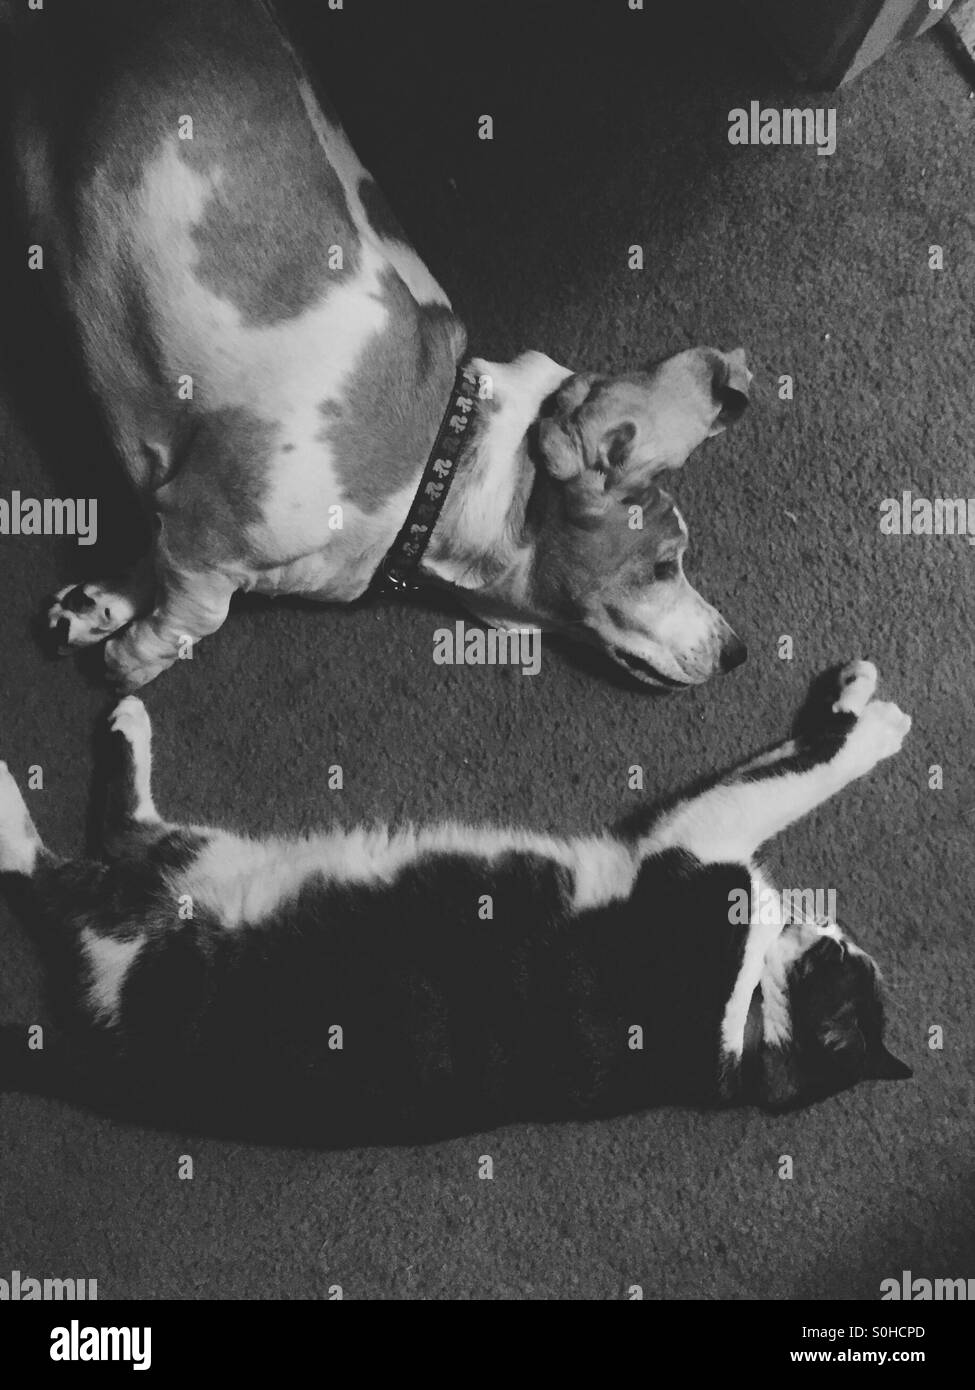 Overhead view of basset hound and cat. Stock Photo